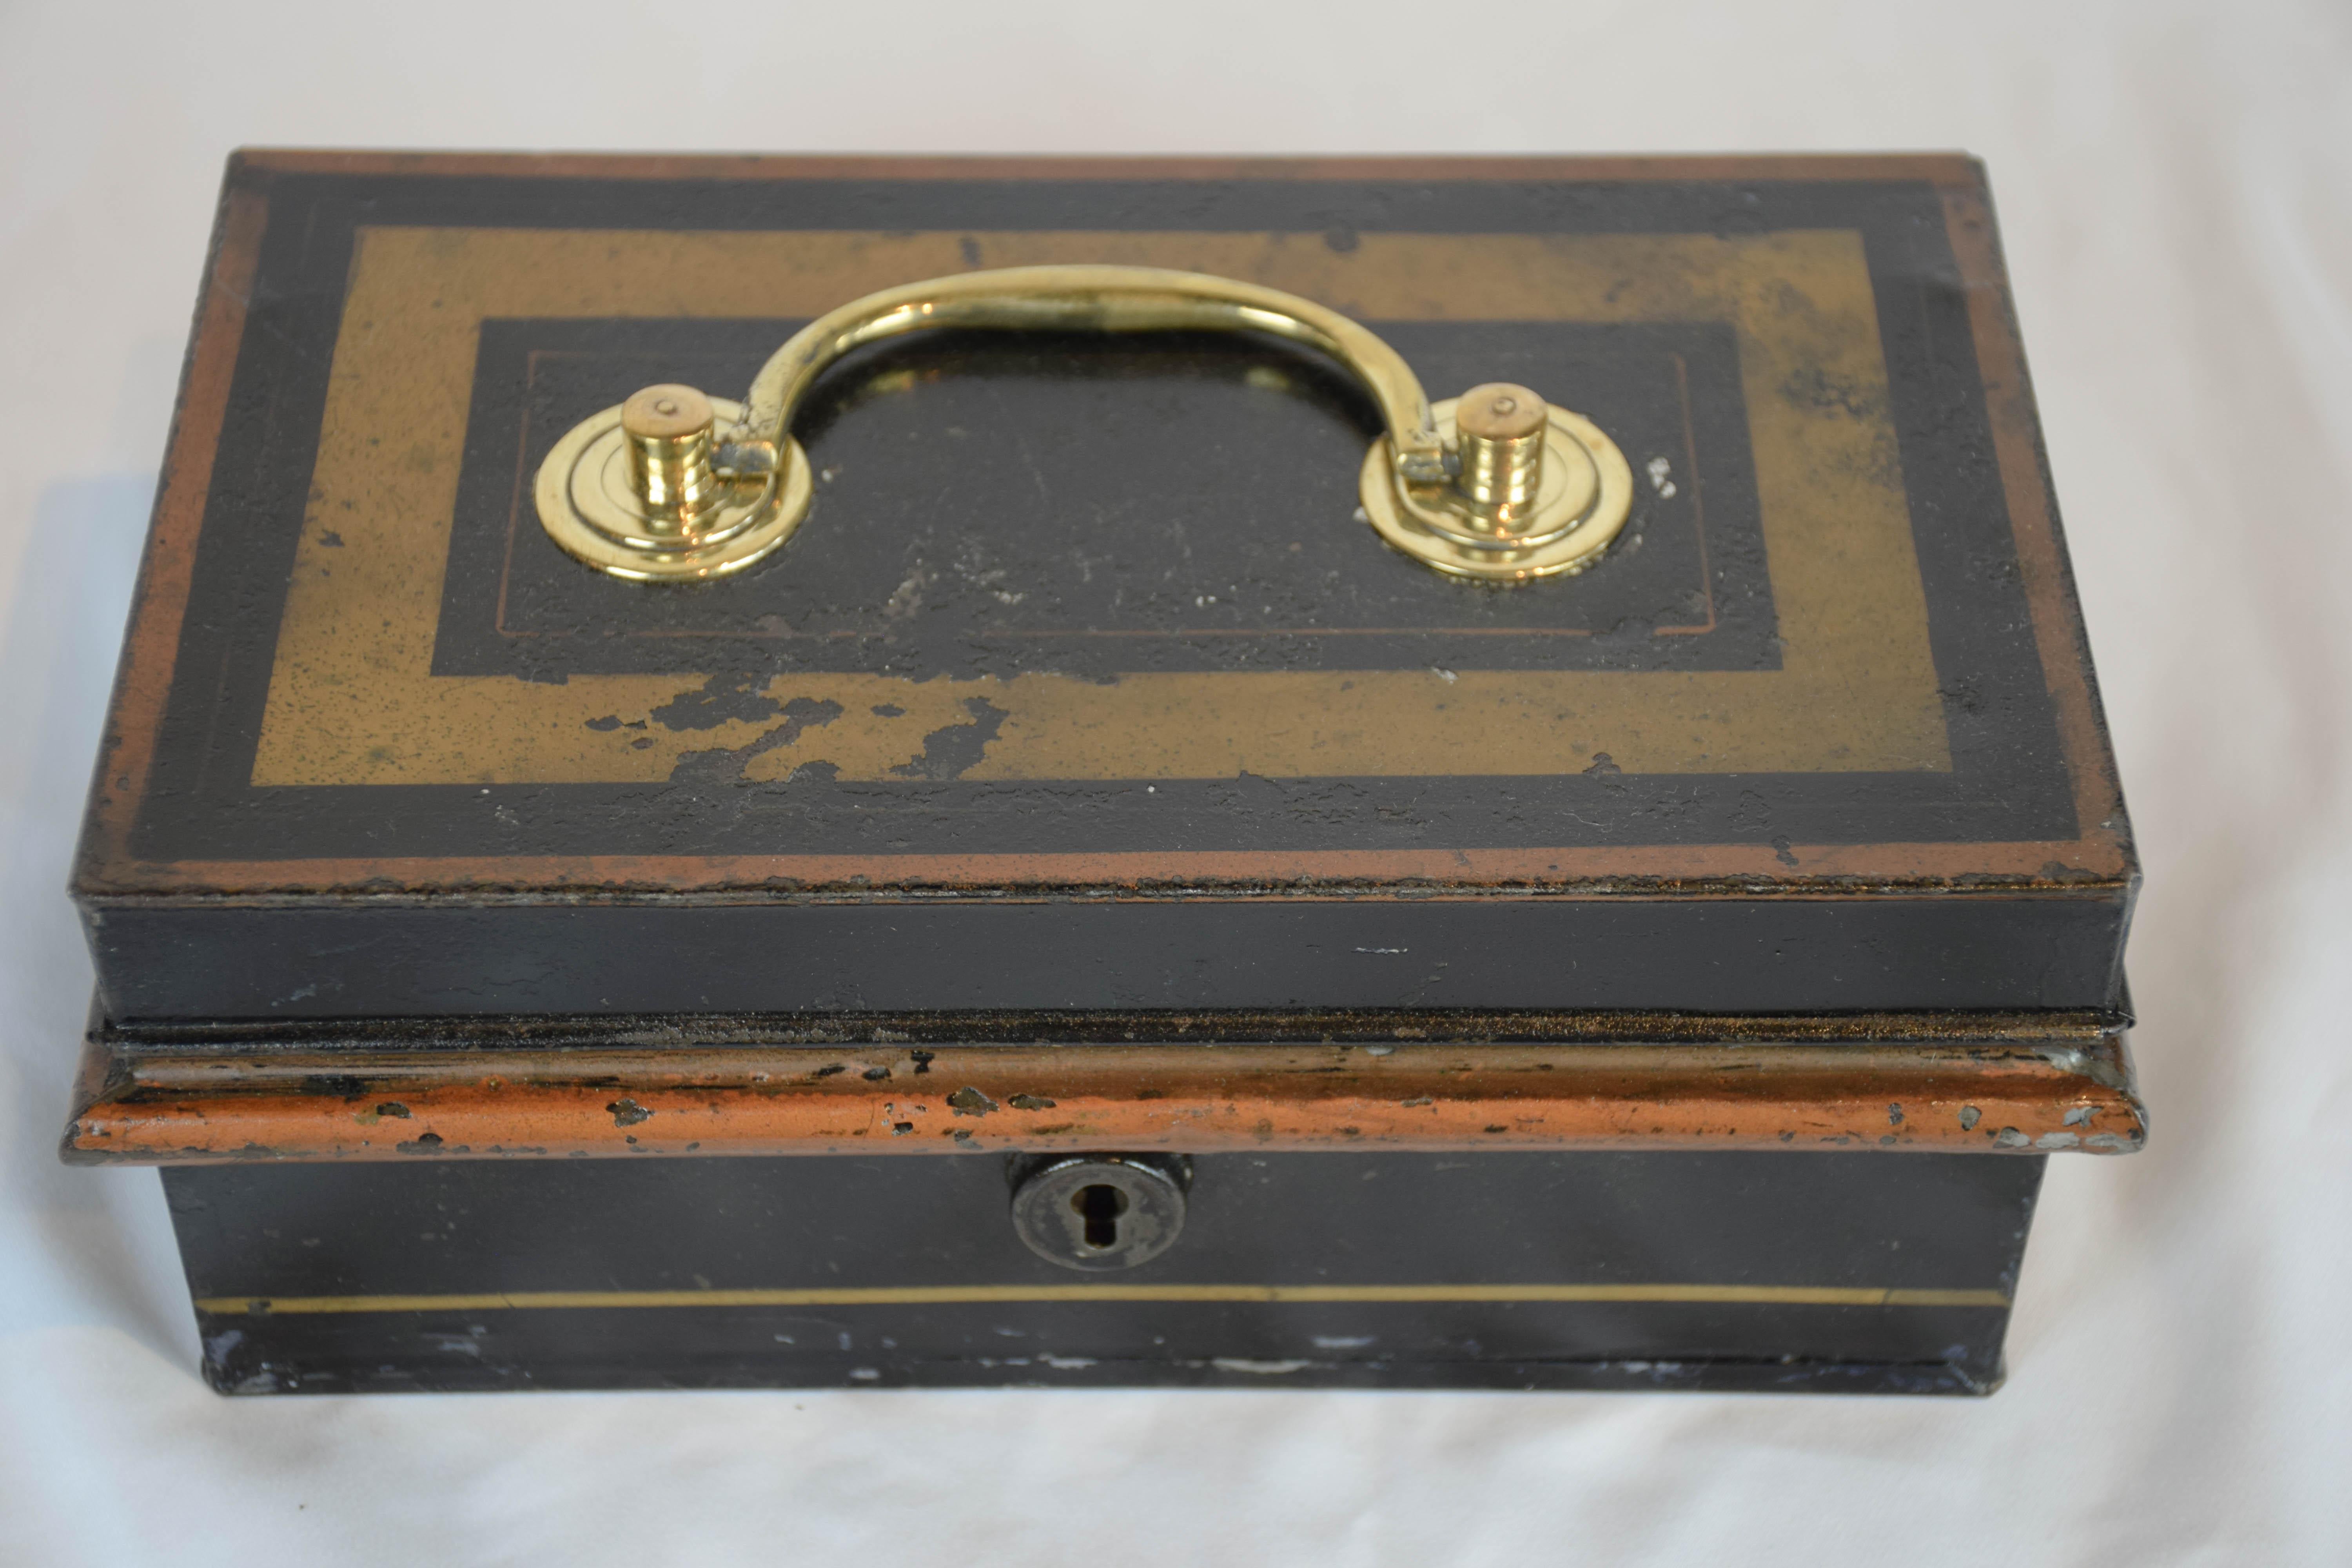 This 19th century English cash box is all original including the key. The box when open has an insert with 2 compartments with hinged lids and a handle. It has a beautiful painted patina.